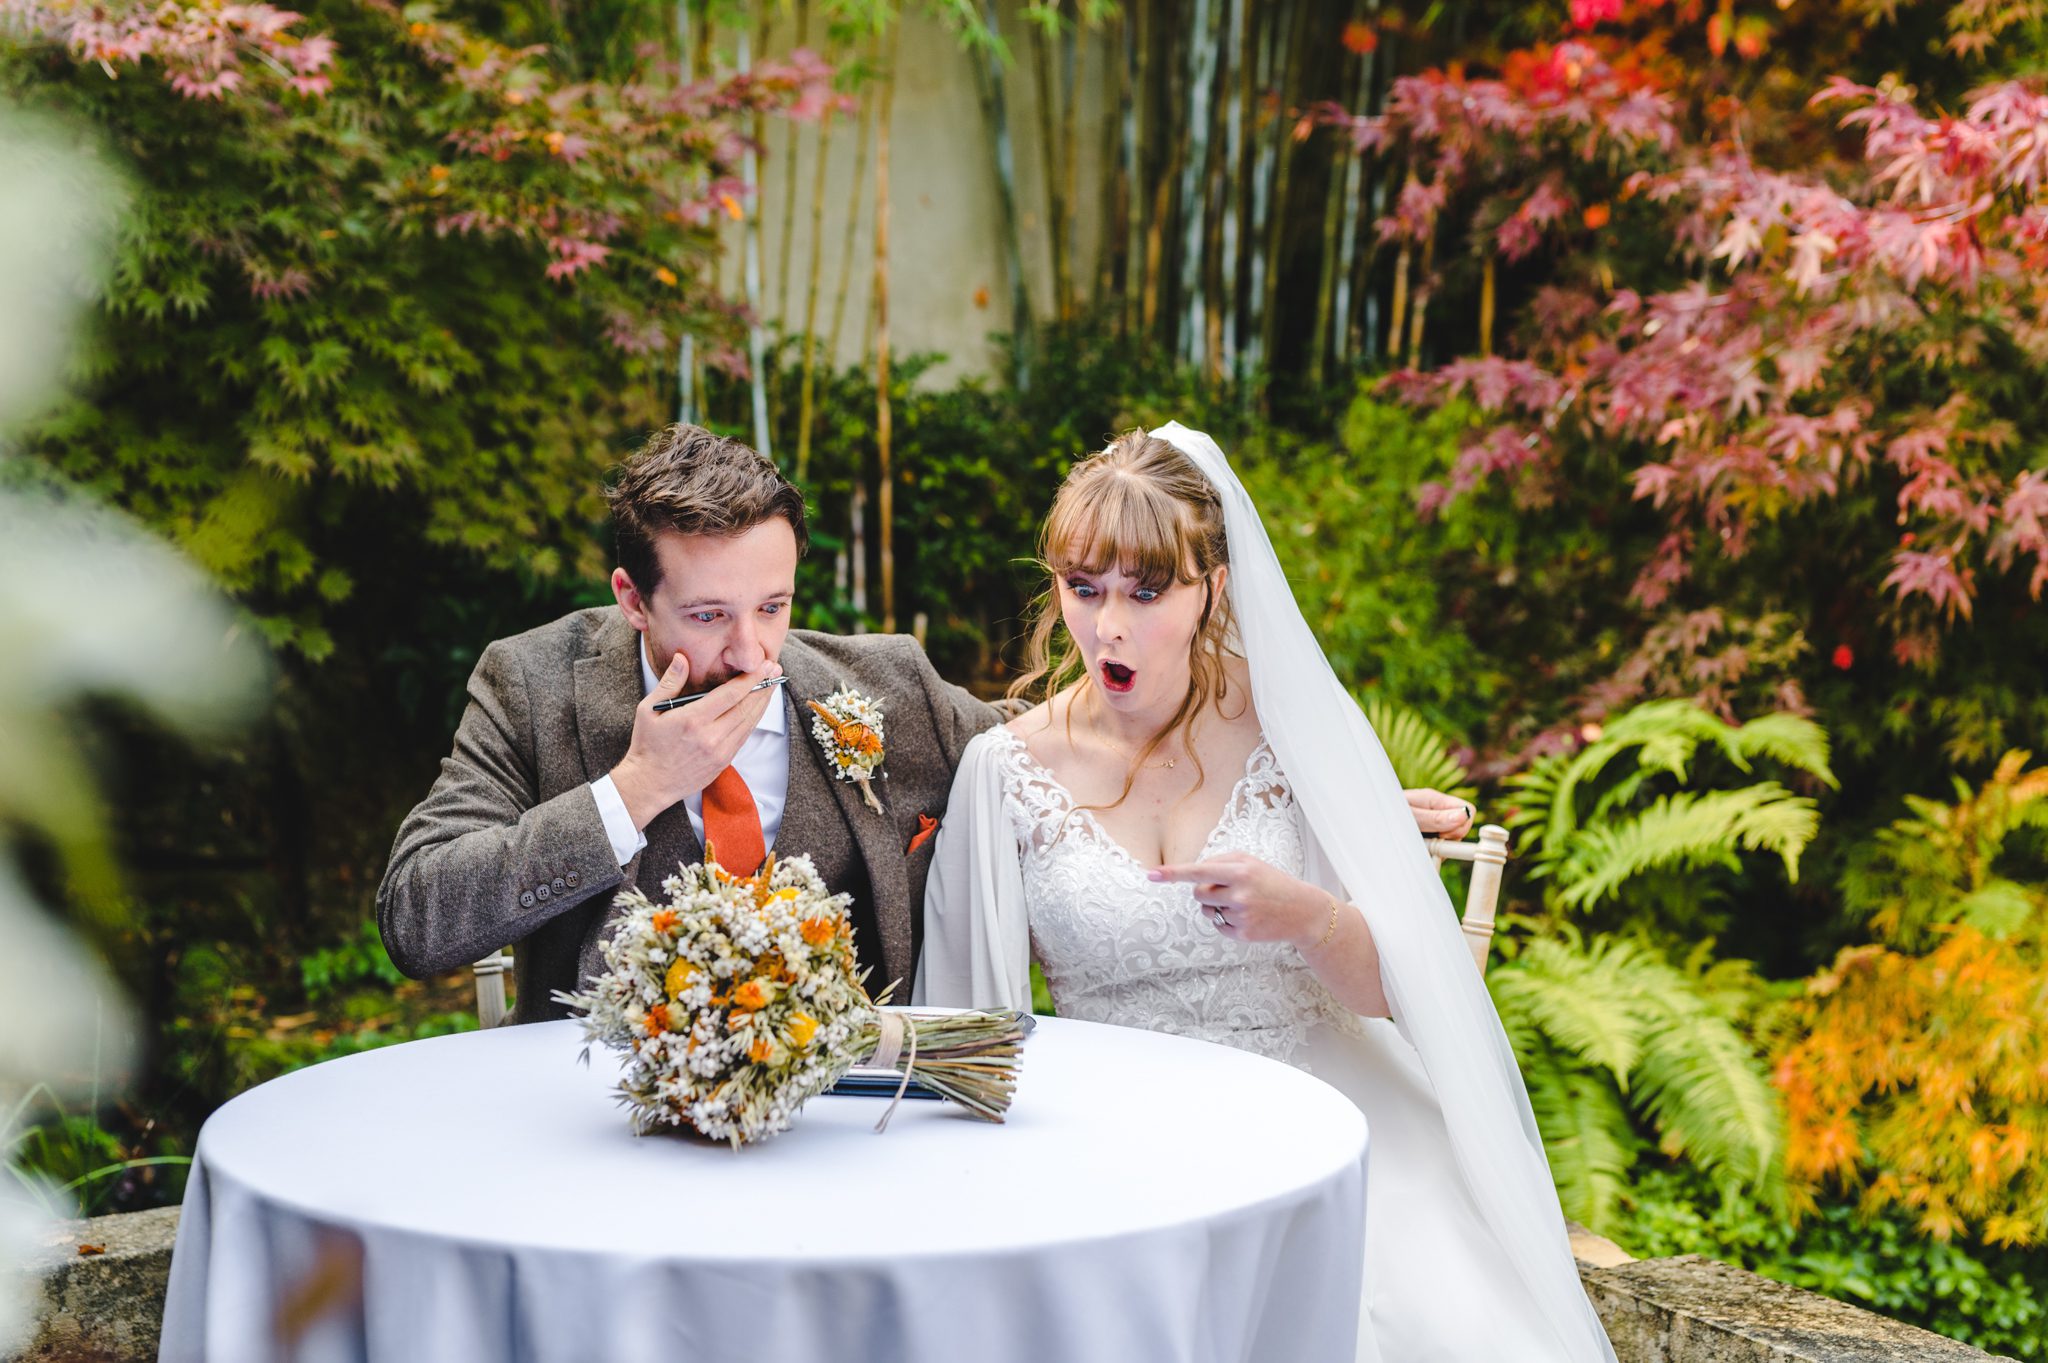 Fun photo bride and groom pretend to be shocked at being married